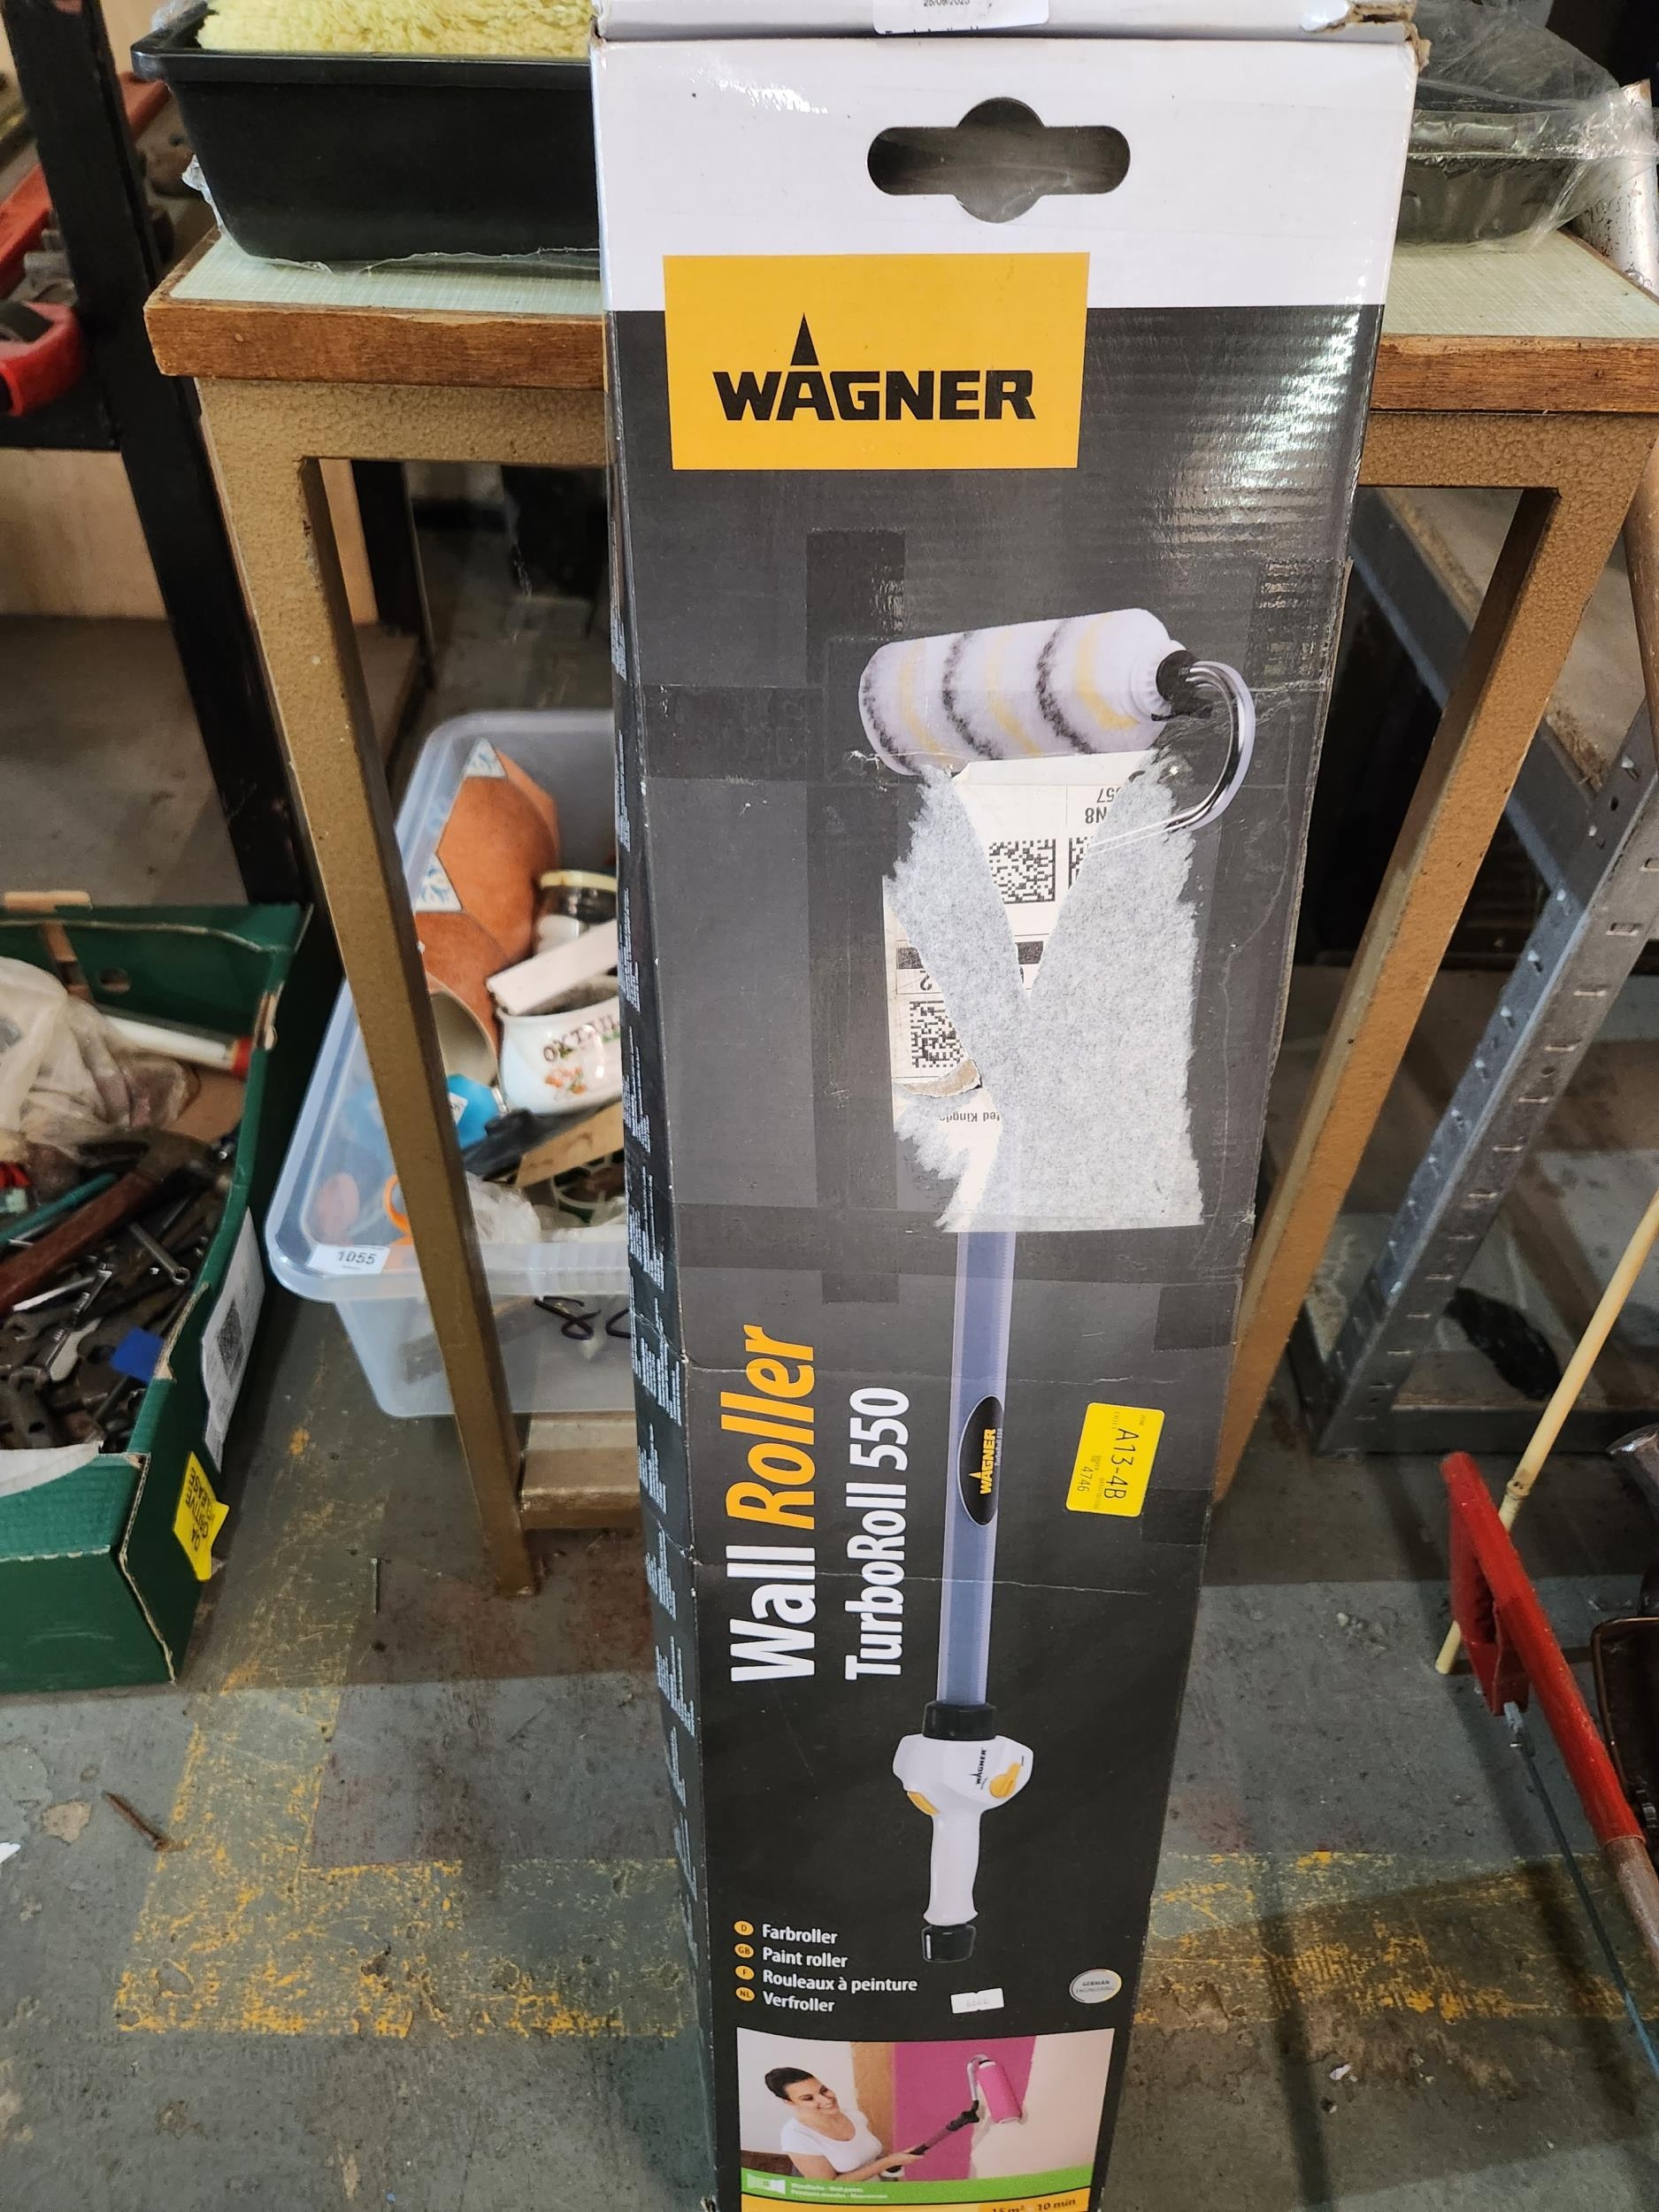 WAGNER BRAND NEW WALL ROLLER TURBOROLL 550 IN